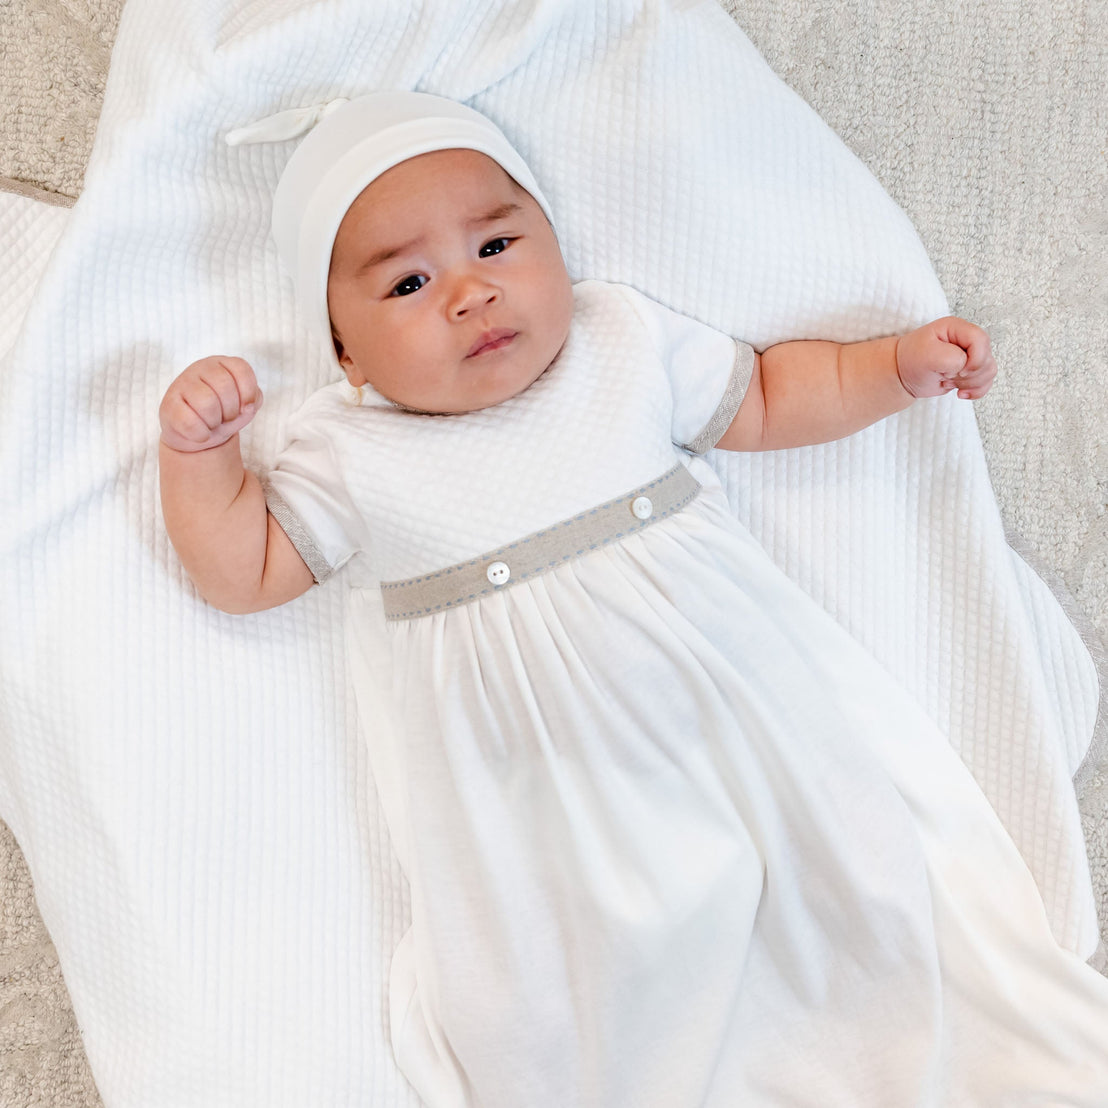 A baby dressed in the Austin Layette & Hat, white and gray coming home outfit lies on a soft blanket, looking upwards with a cute expression and arms outstretched.